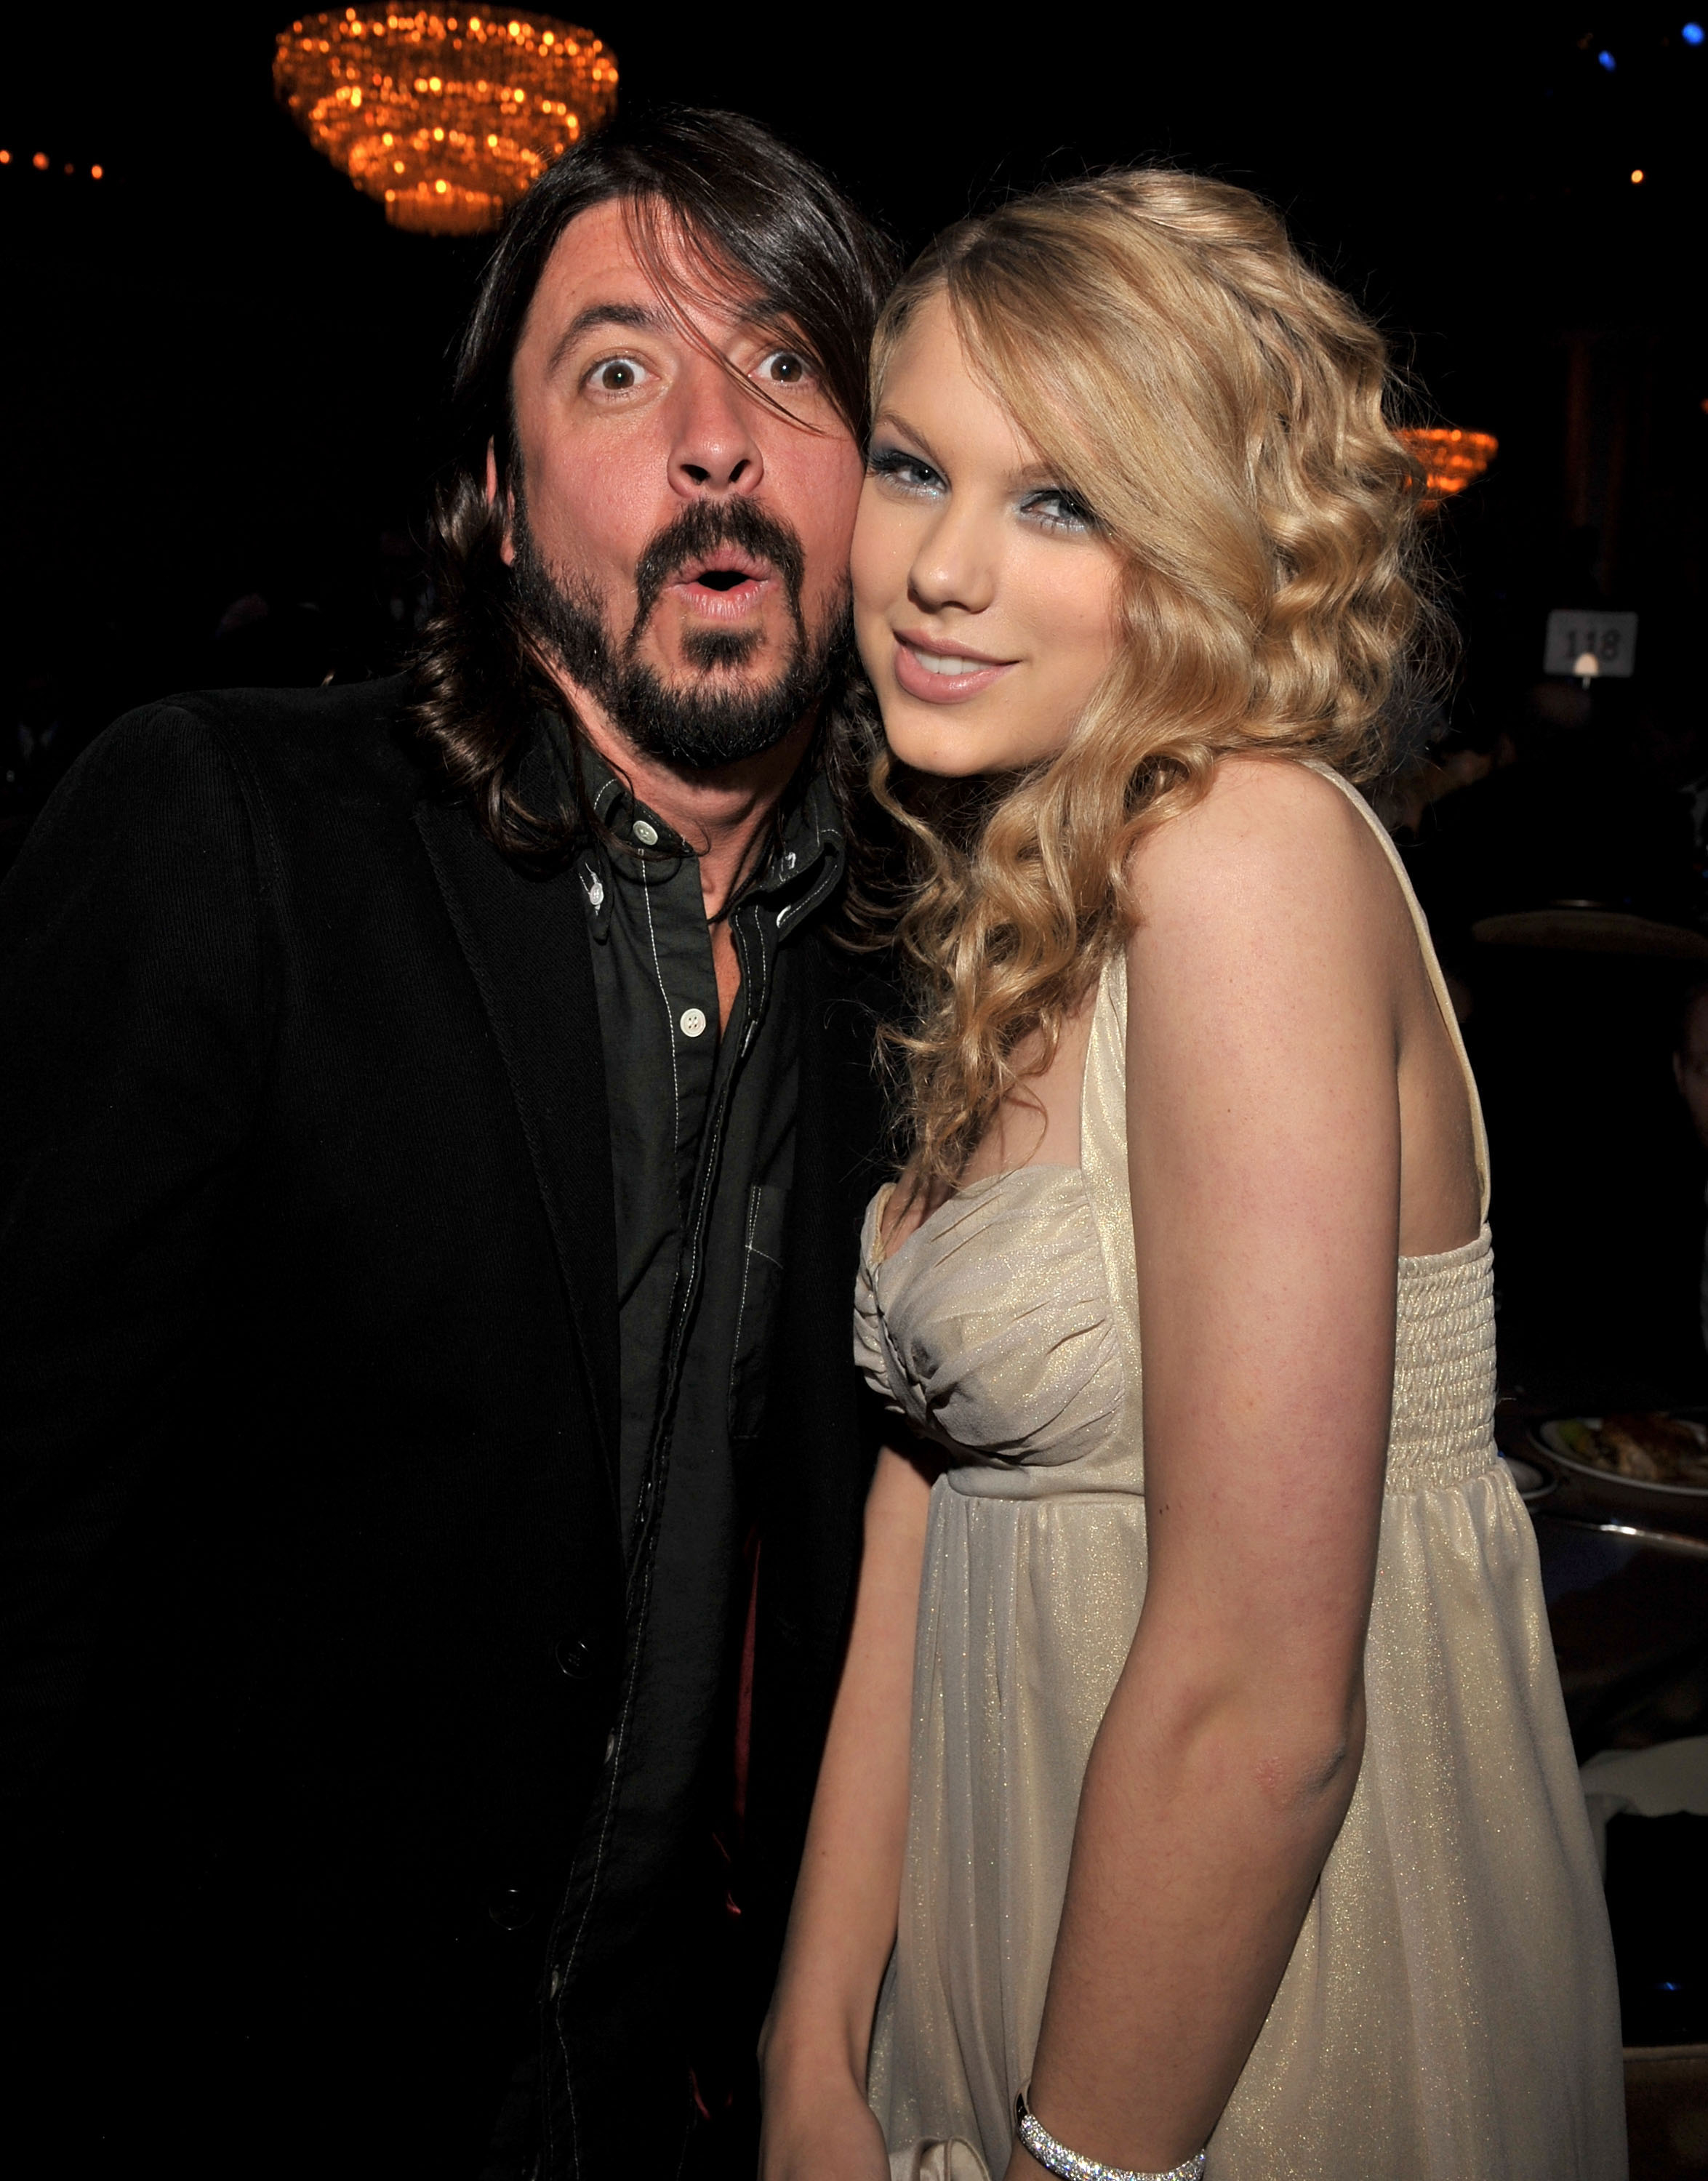 Taylor Swift in a sleeveless dress posing with Dave Grohl in a suit at an event. Both are smiling